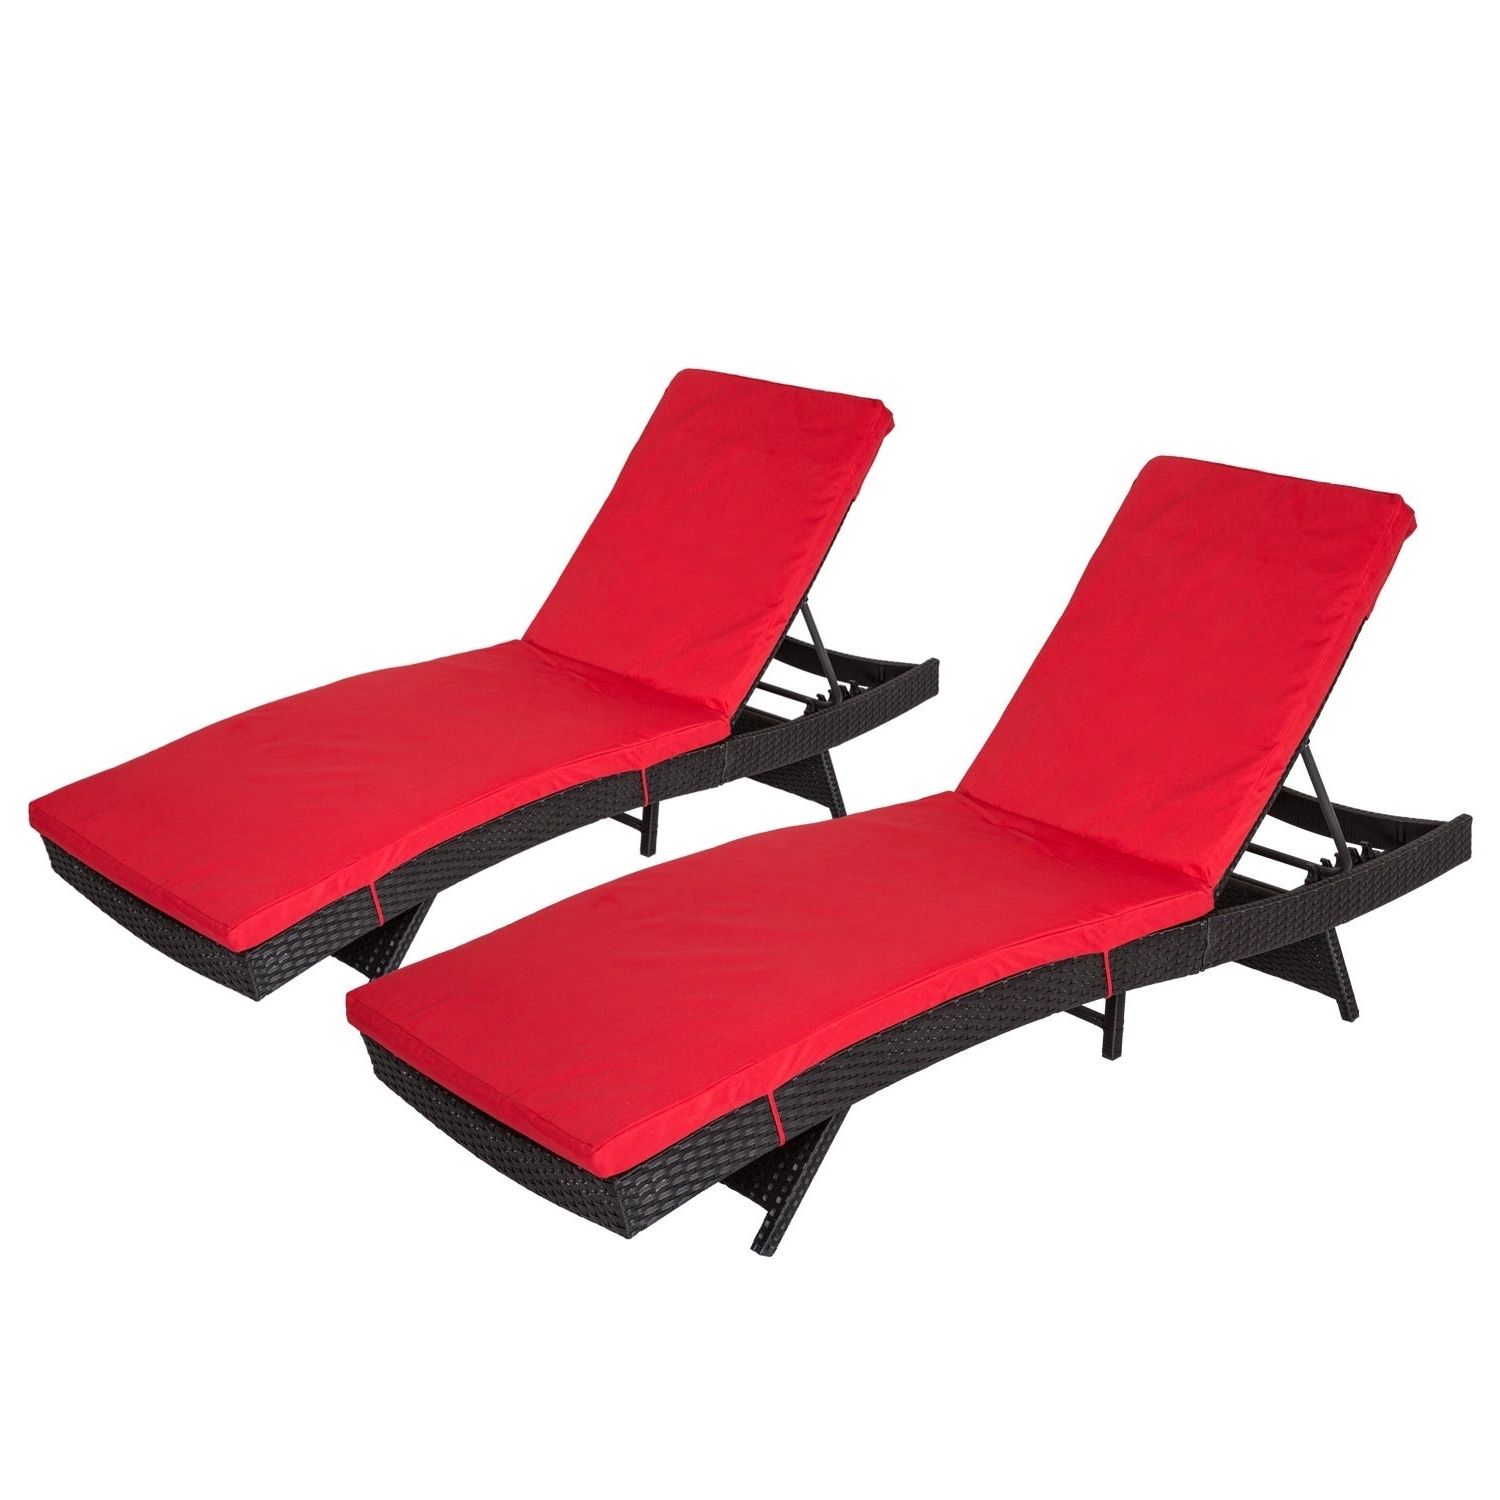 Adjustable Outdoor Wicker Chaise Lounge Chairs With Cushion Regarding Well Liked Kinbor 2 Piece Outdoor Chaise Lounge Chair All Weather Pe Rattan Wicker  Chaise Lounge Chair Furniture W/cushions (View 3 of 25)